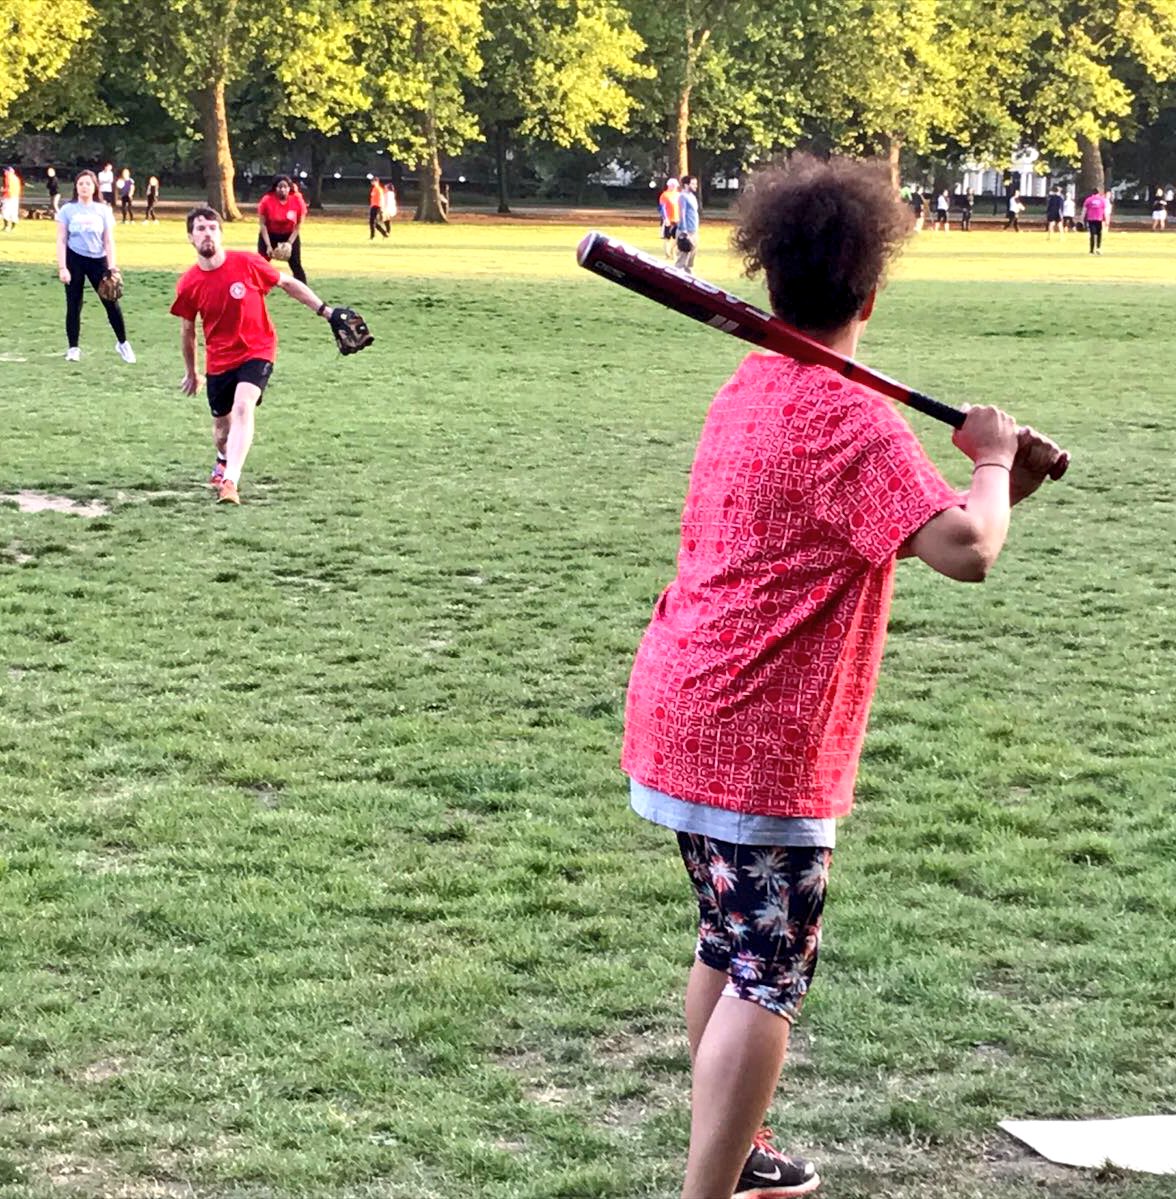 Good vibes at Hyde Park for a sunny @CharitySoftball match with @ComixSoftball. #GoodVibes #SunnyEvening #LCSL #Comix